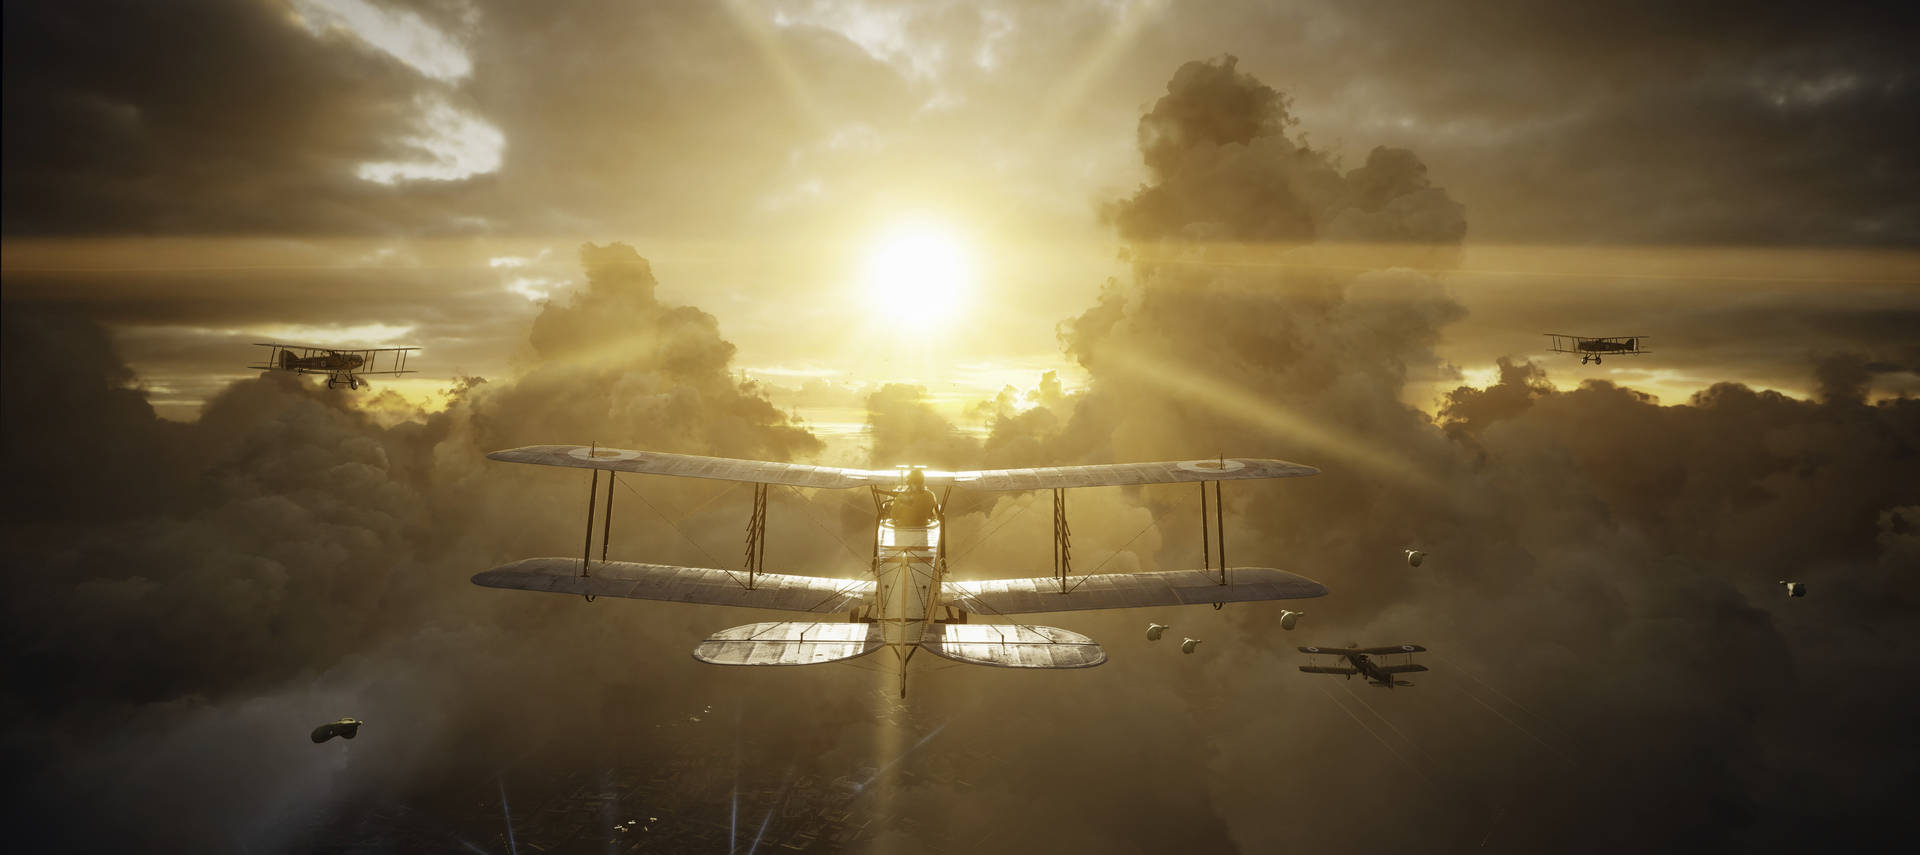 Awesome 4k Bf1 Fighter Wing